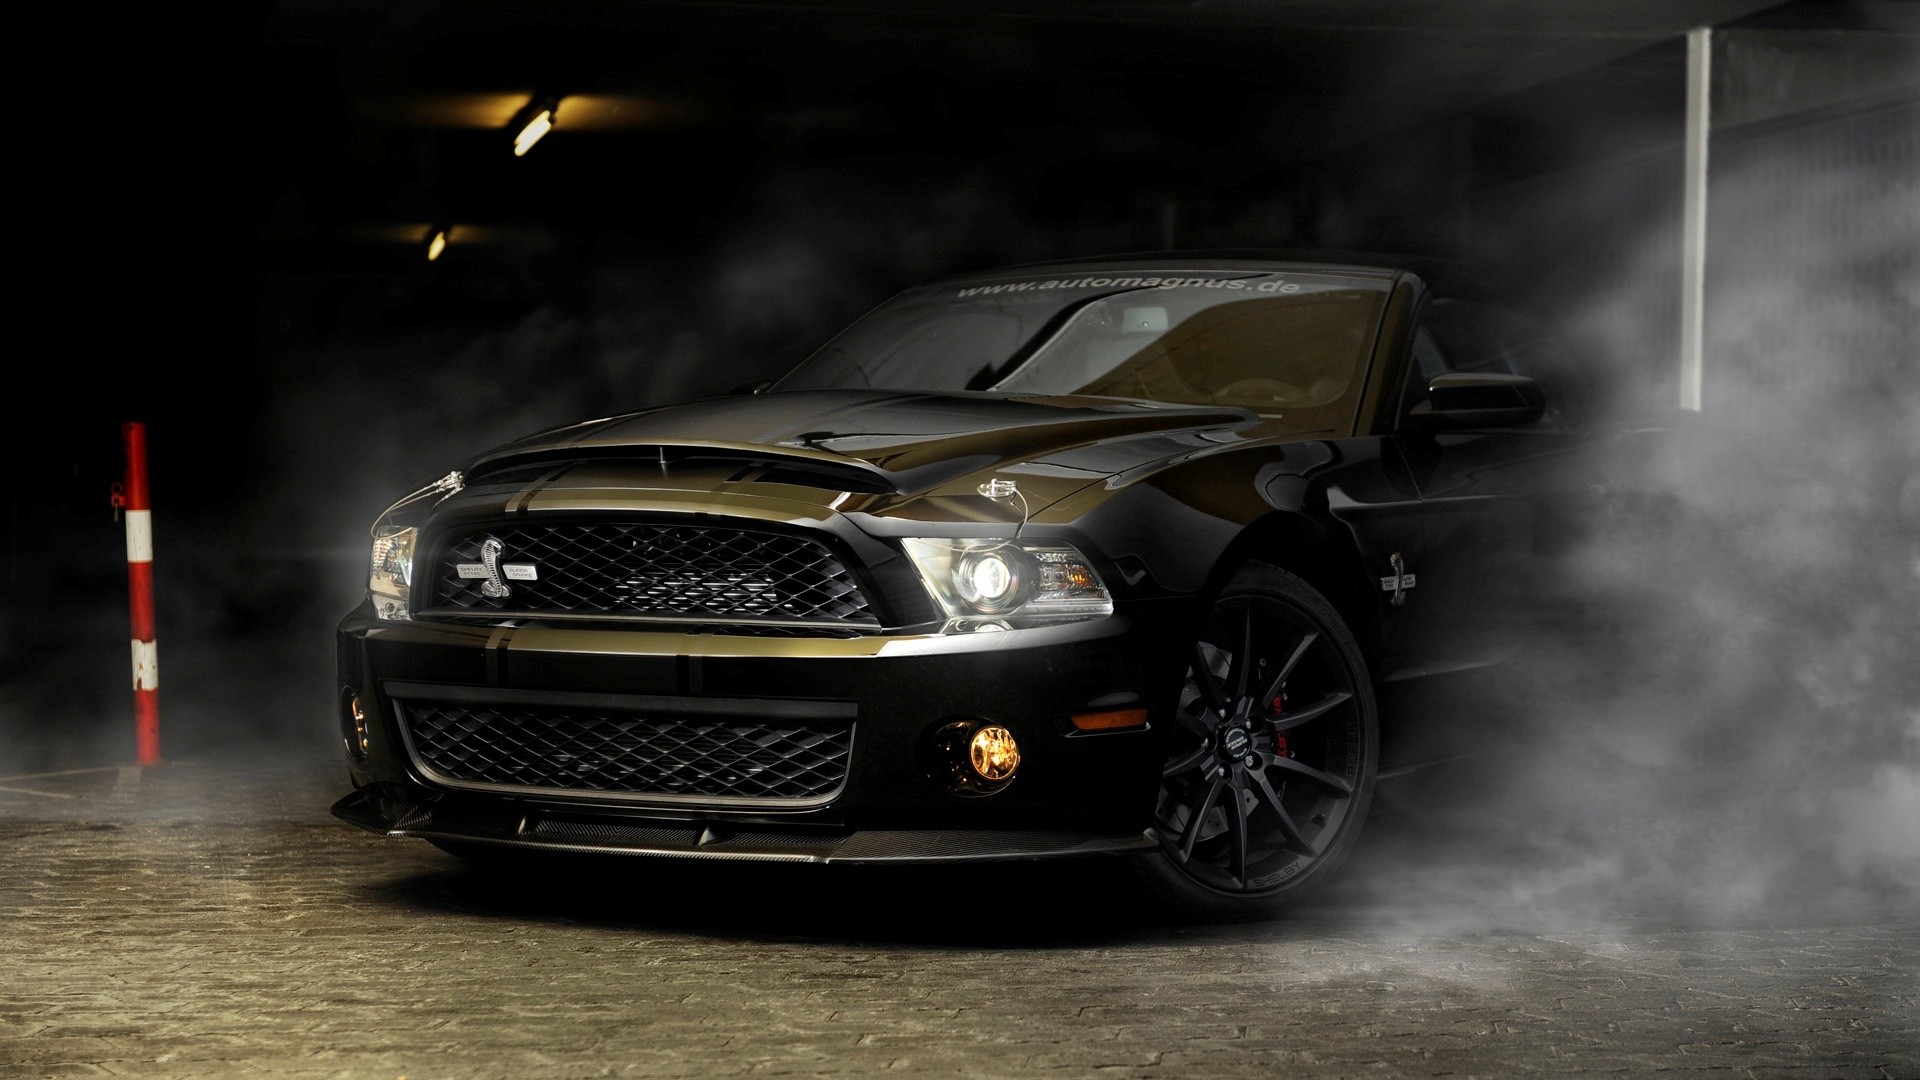 Car Muscle Cars Ford Mustang Shelby Wallpapers Hd Desktop And Mobile Backgrounds